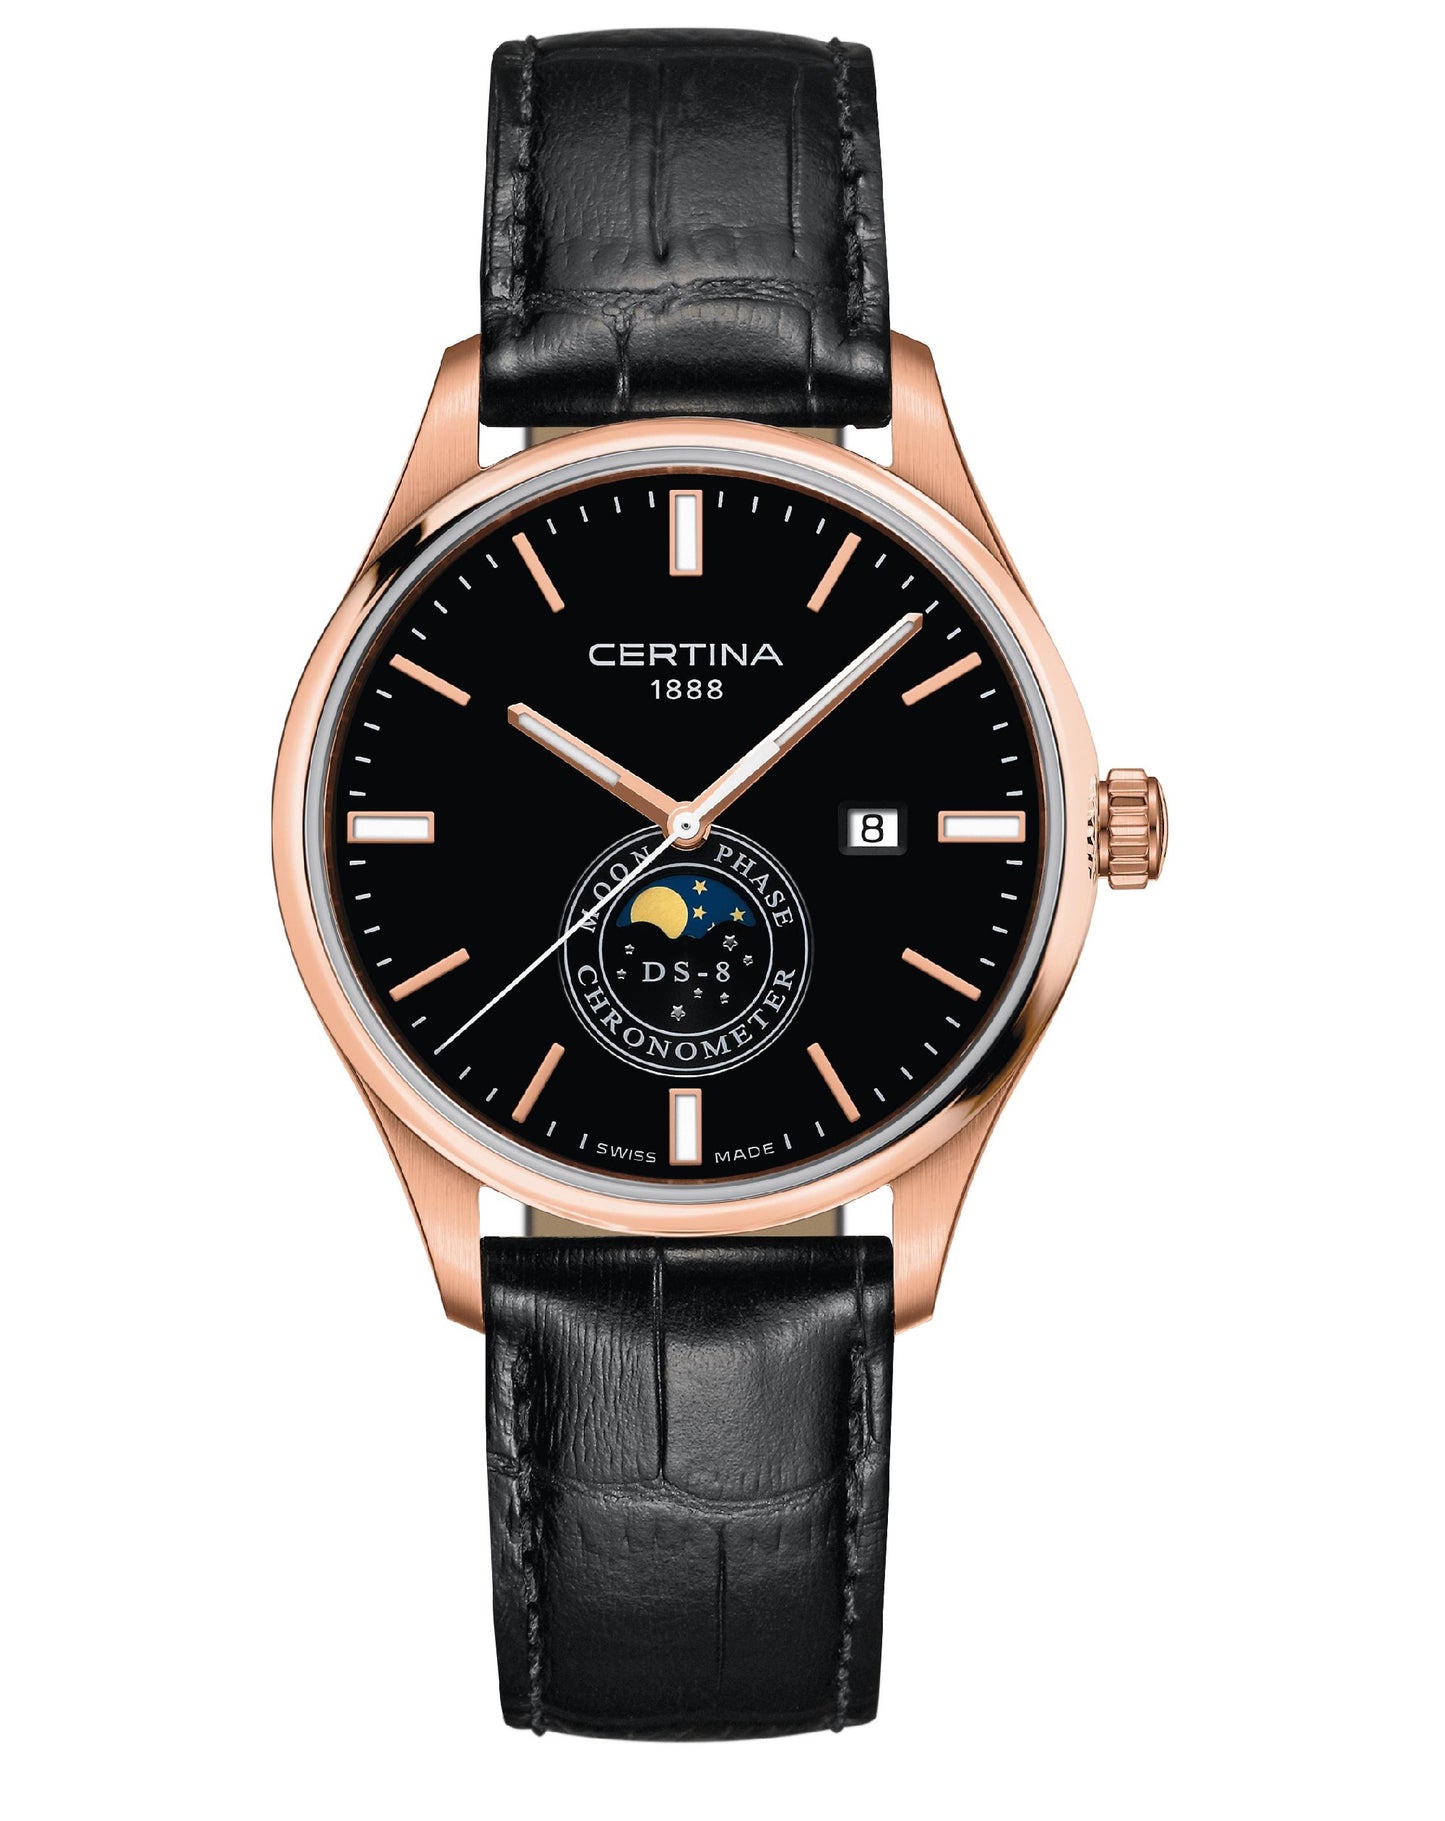 Certina CERTINA DS-8 MOON Phase COSC 41,00MM Watch